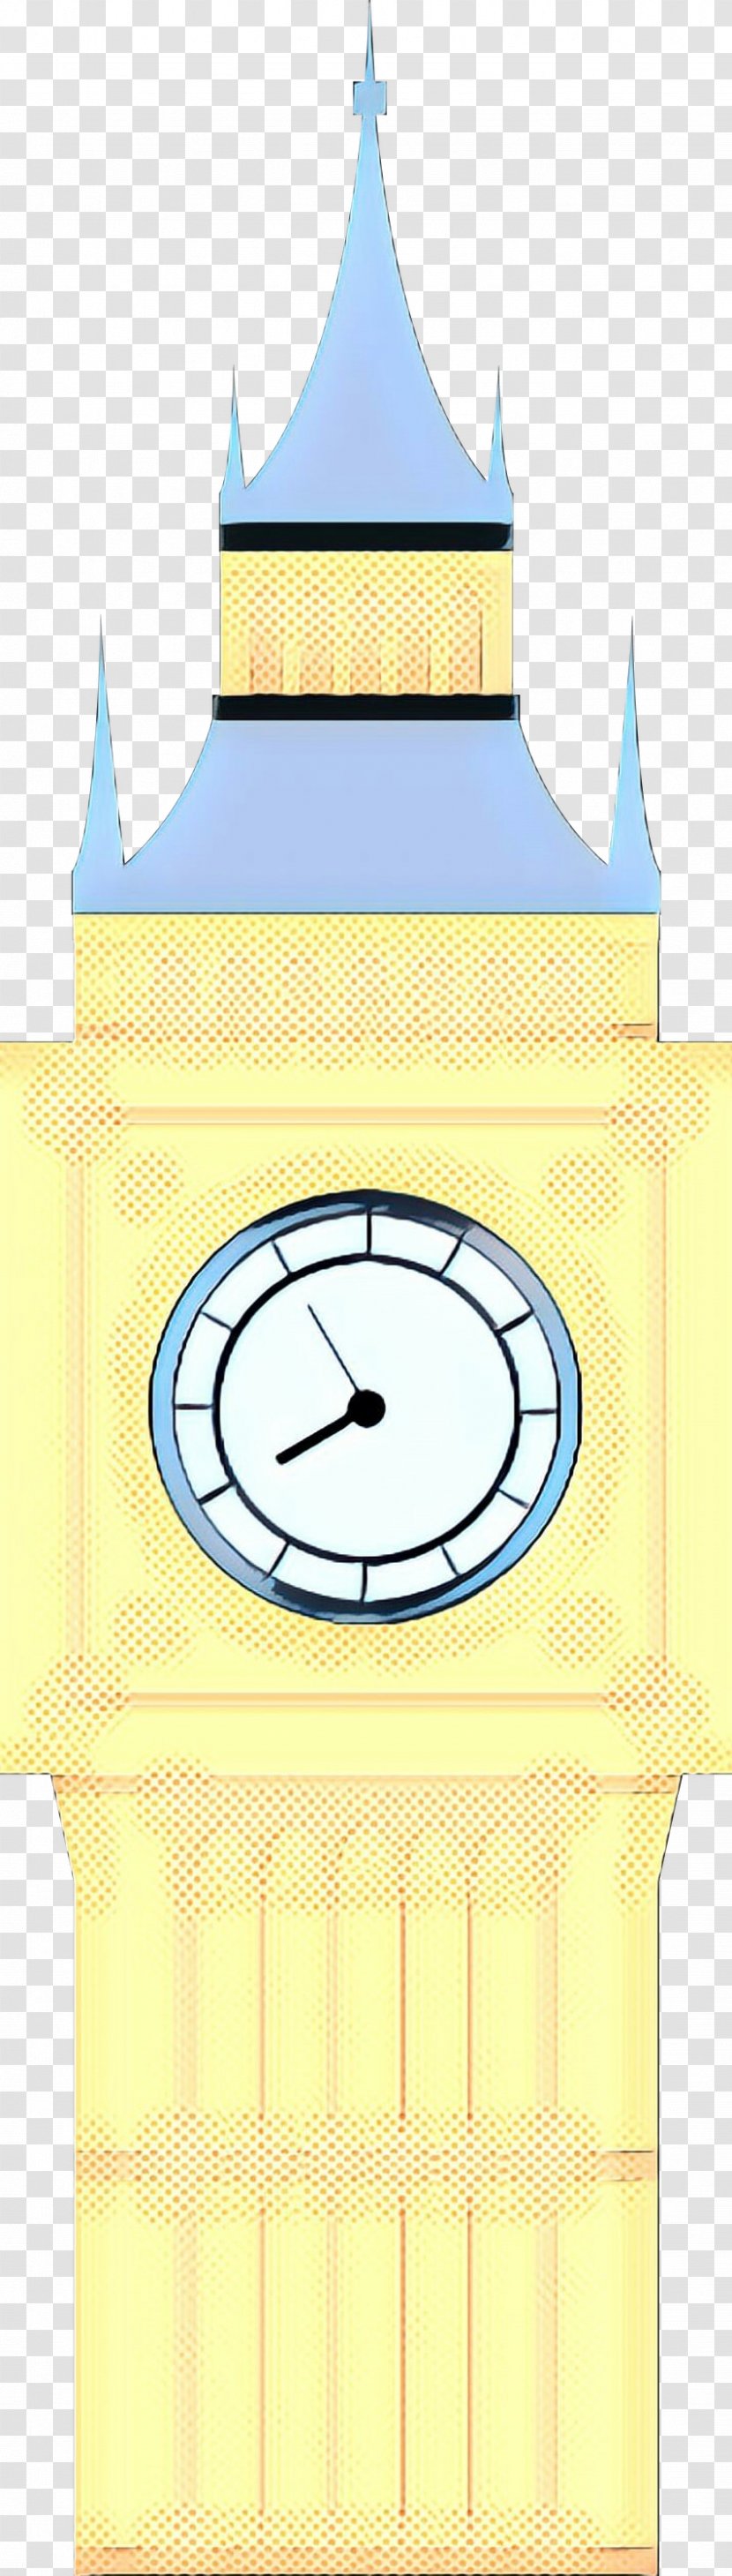 Clock Tower Product Design Pattern - Analog Watch Transparent PNG